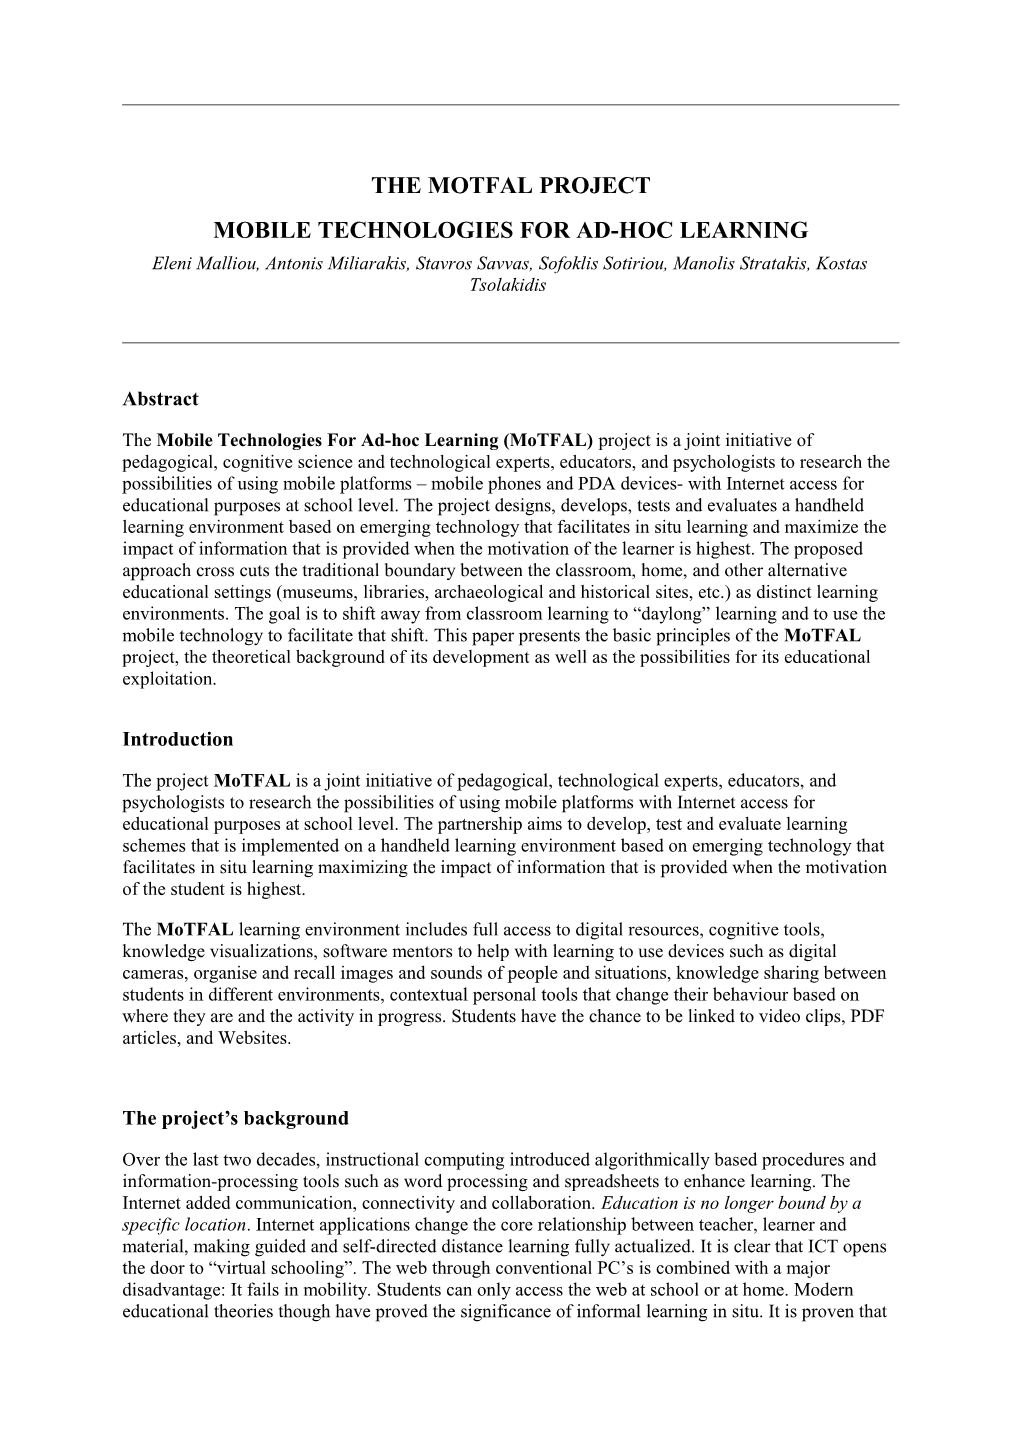 Mobile Technologies for Ad-Hoc Learning